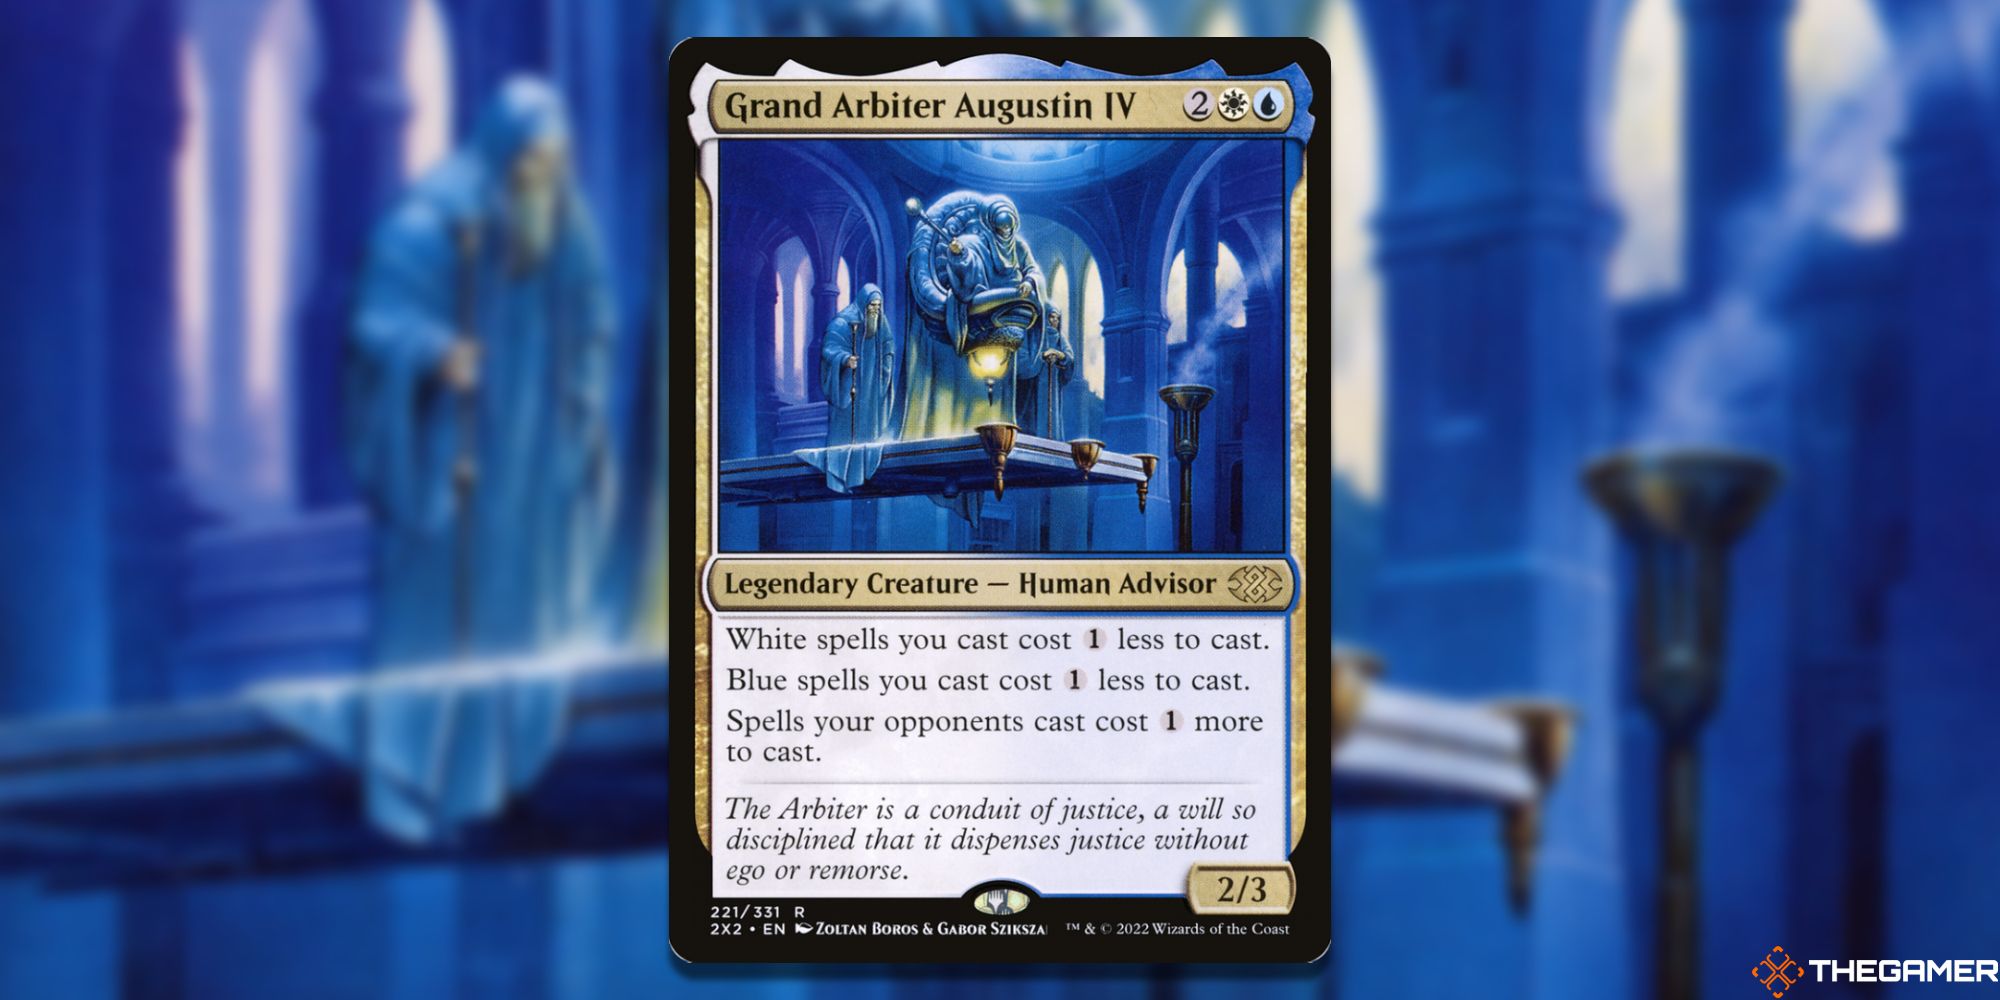 Image of the Grand Arbiter Augustin IV card in Magic: The Gathering, with art by Zoltan Boros & Gabor Sziksza